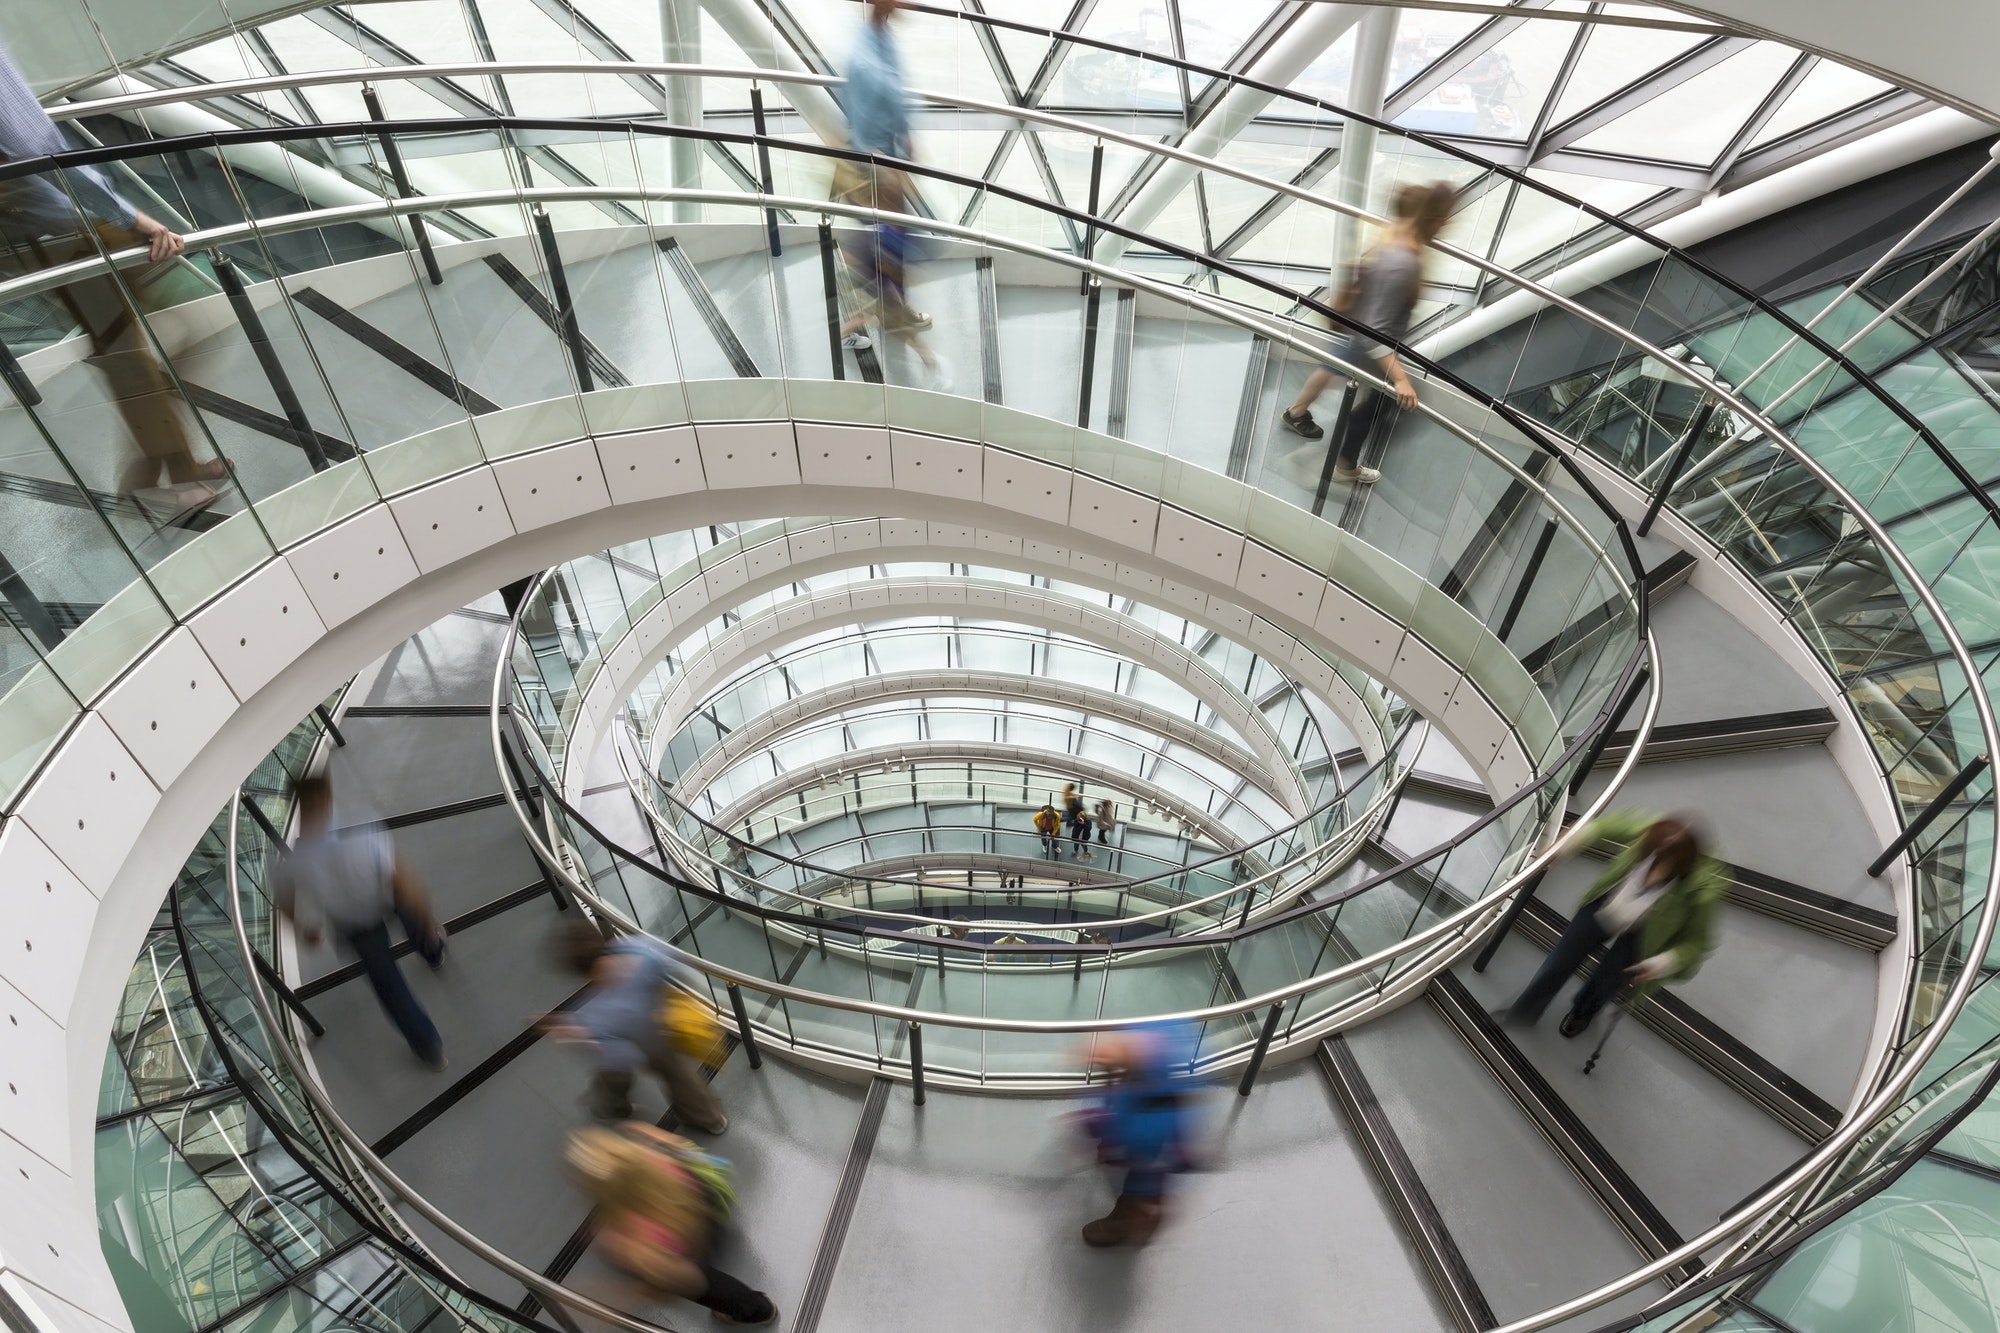 Interior view of building with people walking along glass and metal spiral staircase.